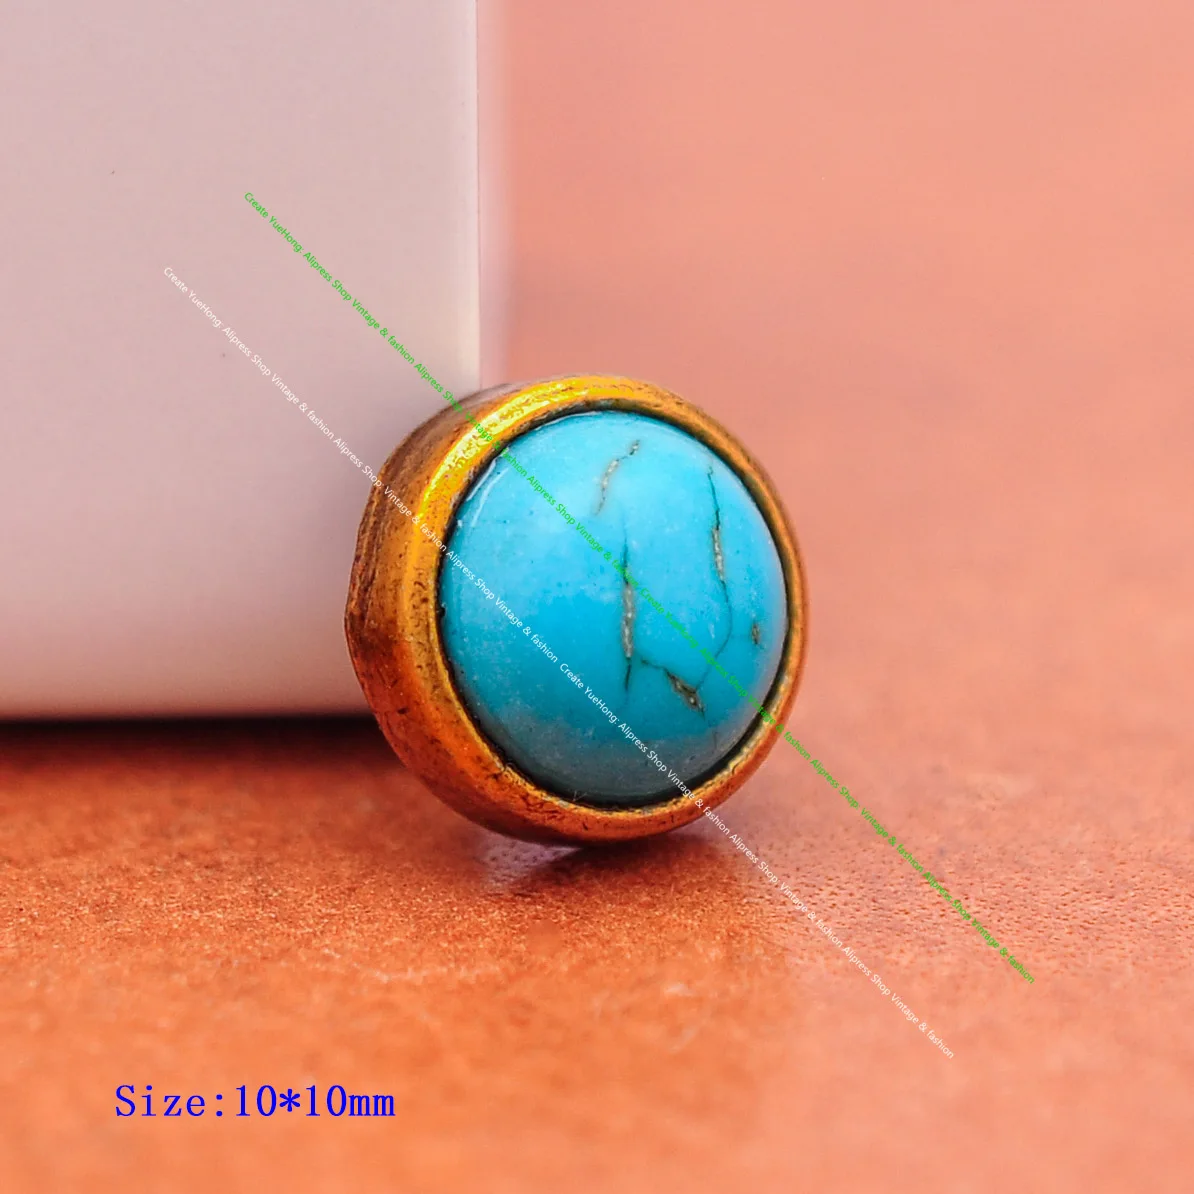 

30pc 10mm Southwest Real Turquoise Stone Gold Metal Rivet Stud Fastener Concho Rivetback For Leathercraft Wallet Decor